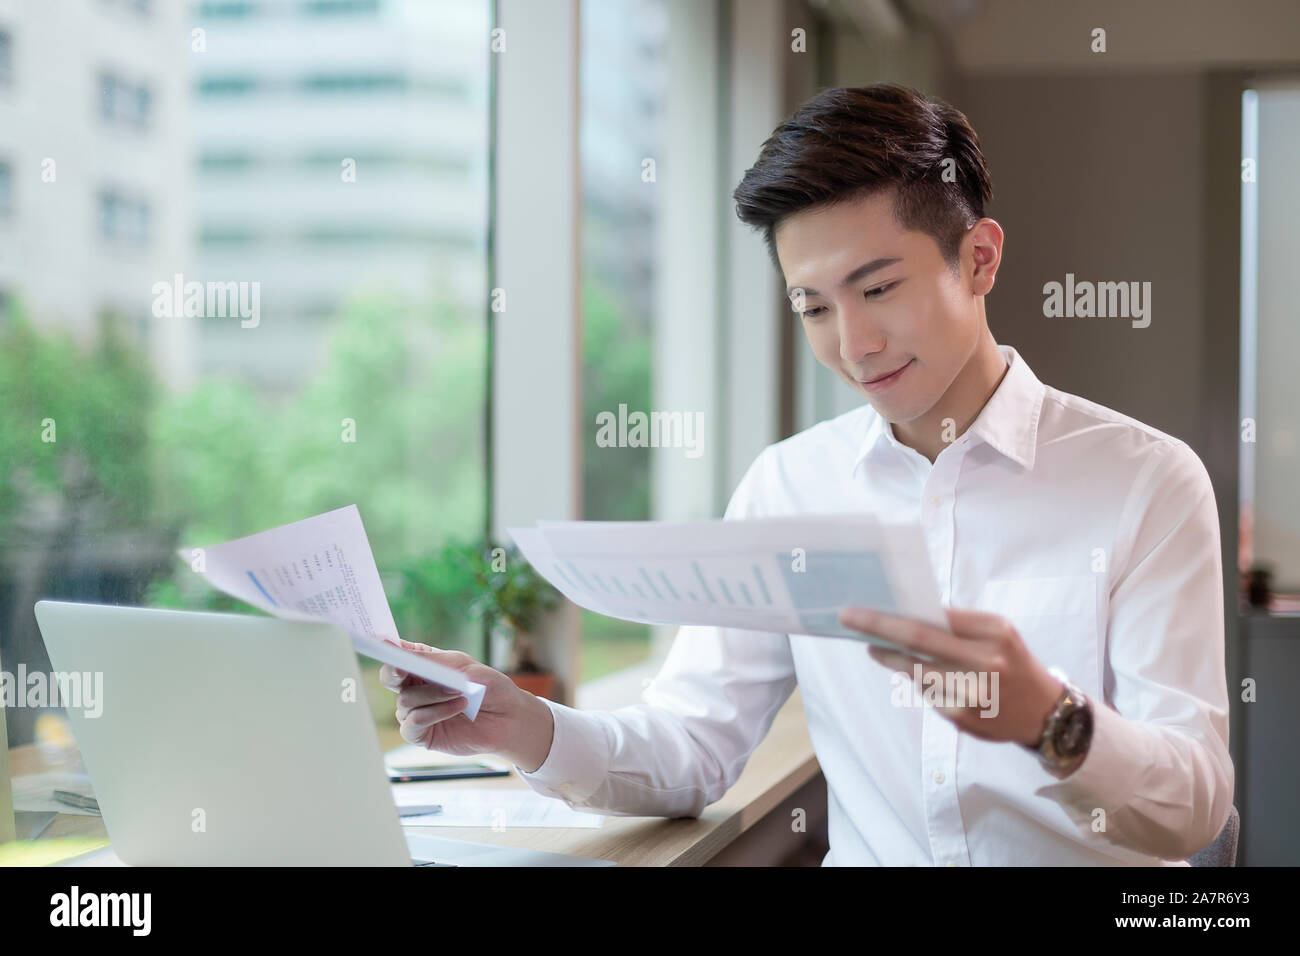 Waist up shot of a busy smiling young businessman with short black hair and a white button down reading documents at a desk in an office Stock Photo